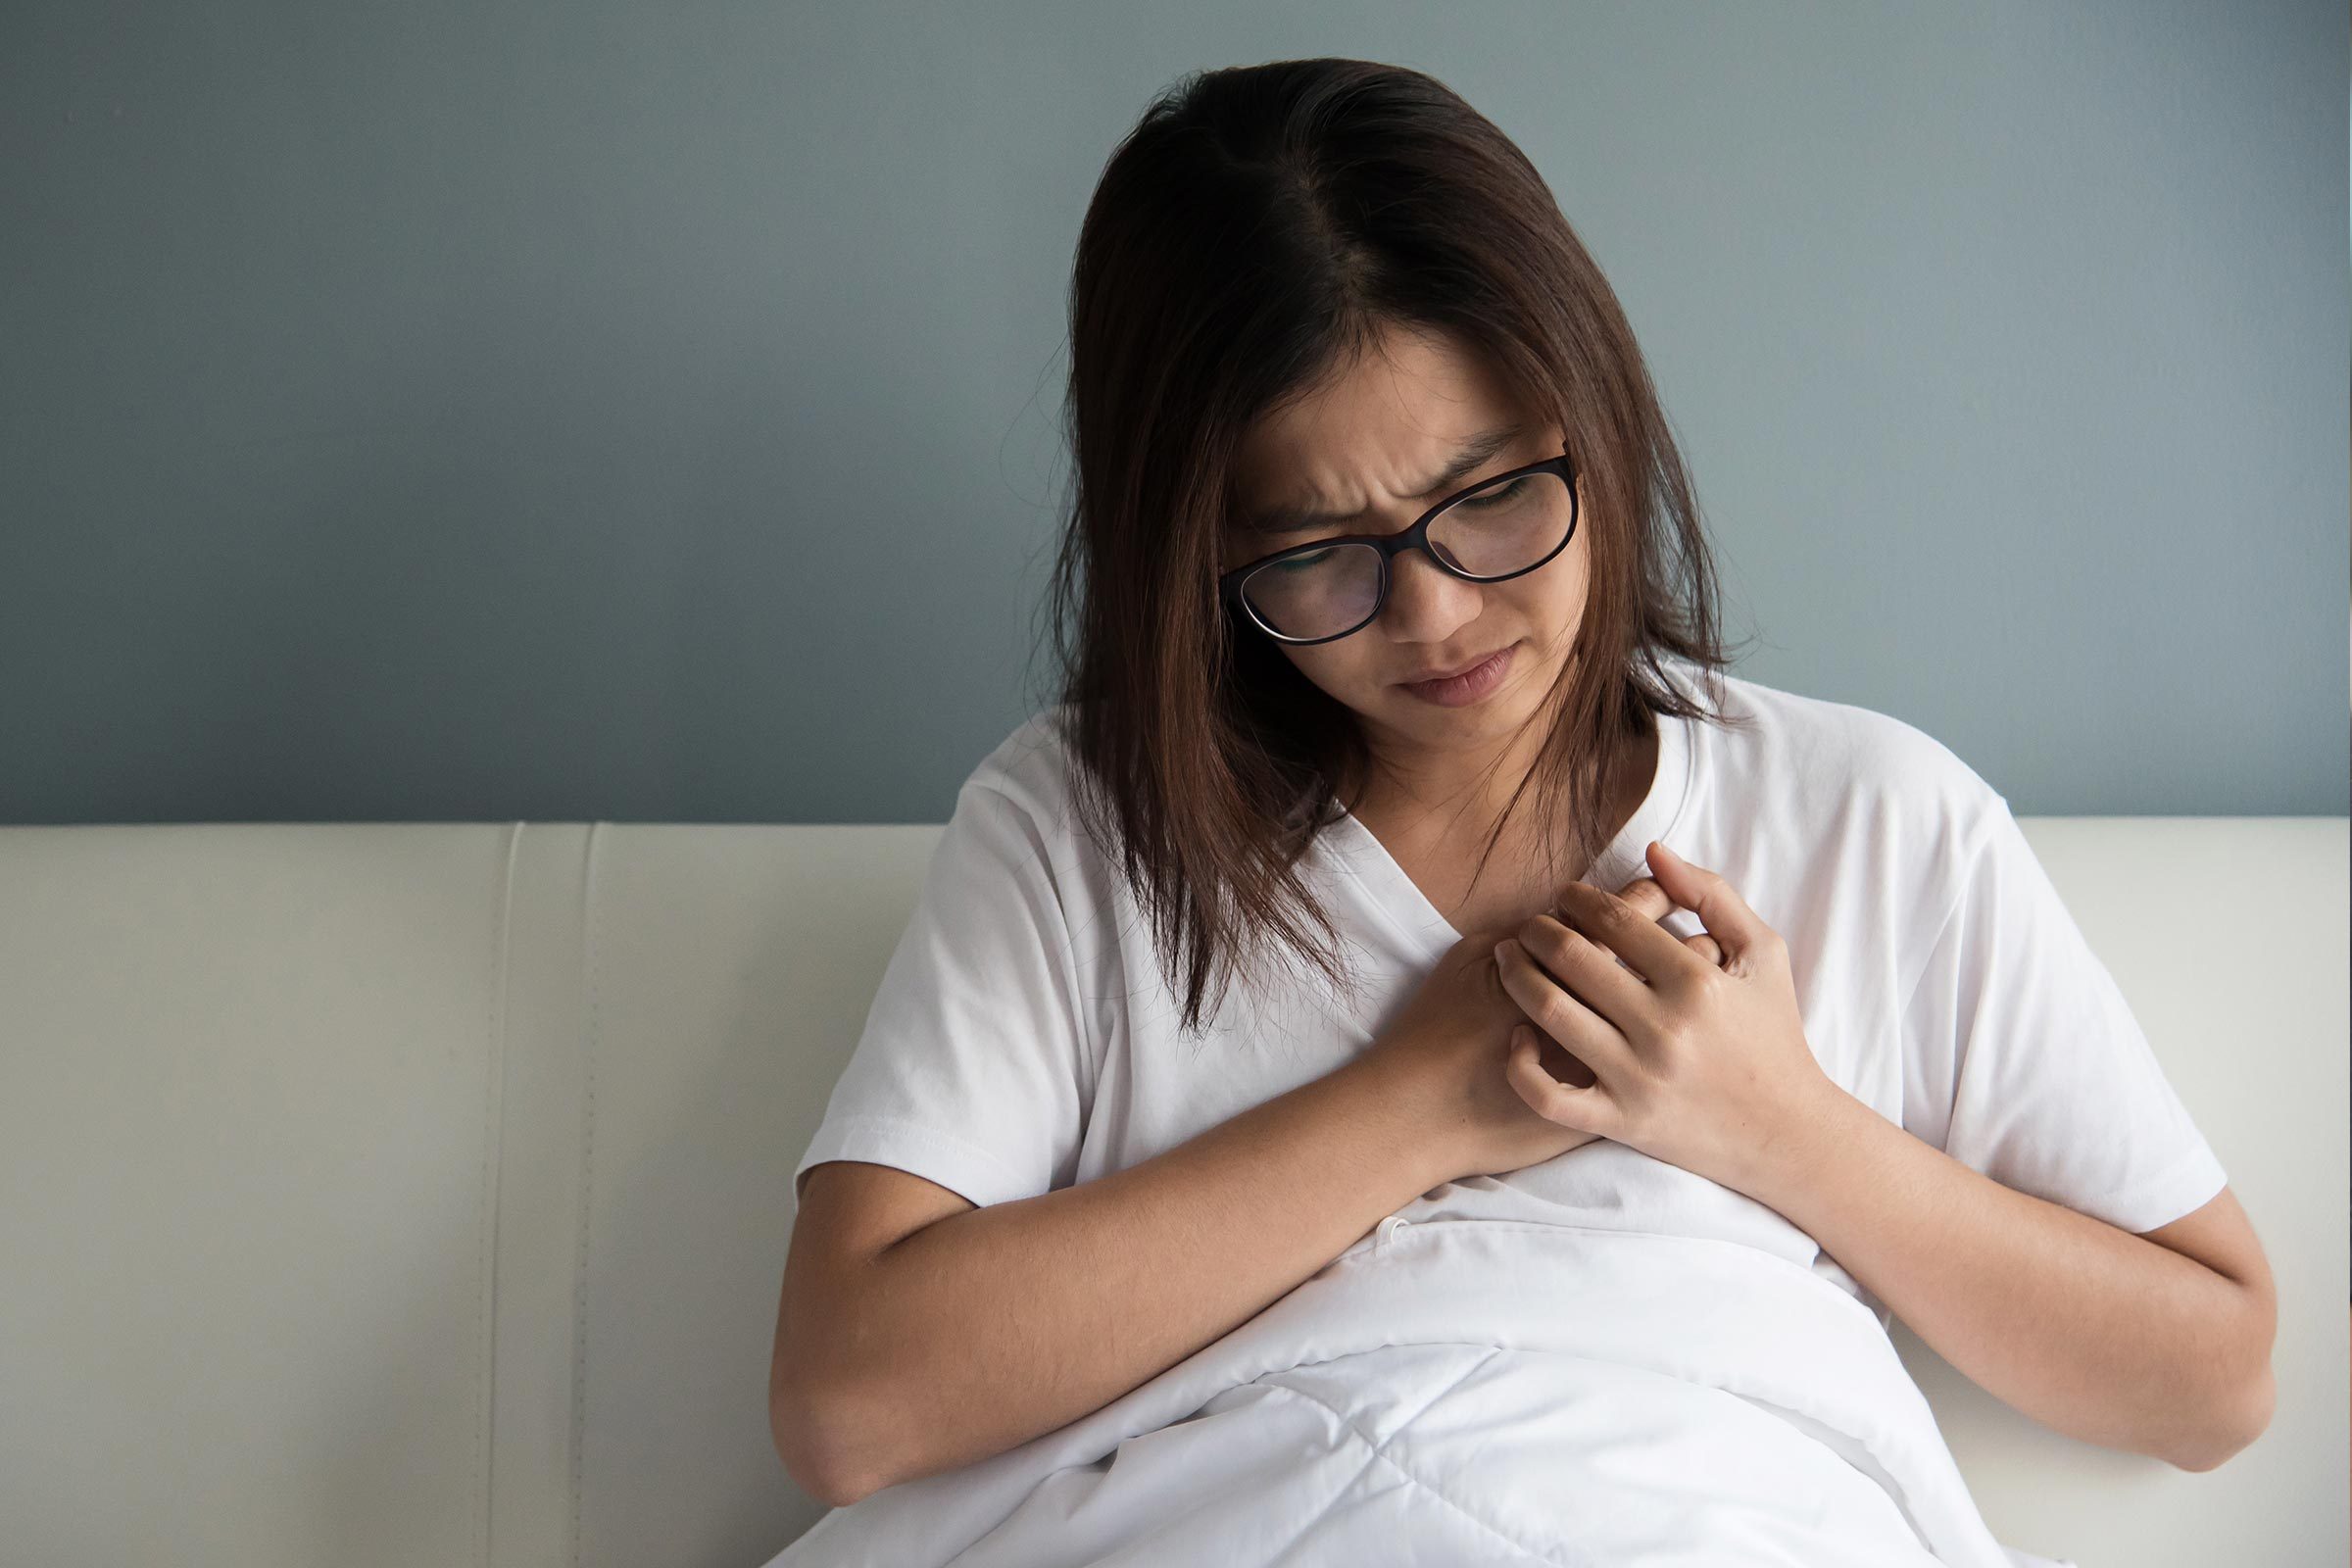 8 Surprising Heartburn Causes You Need to Take Seriously